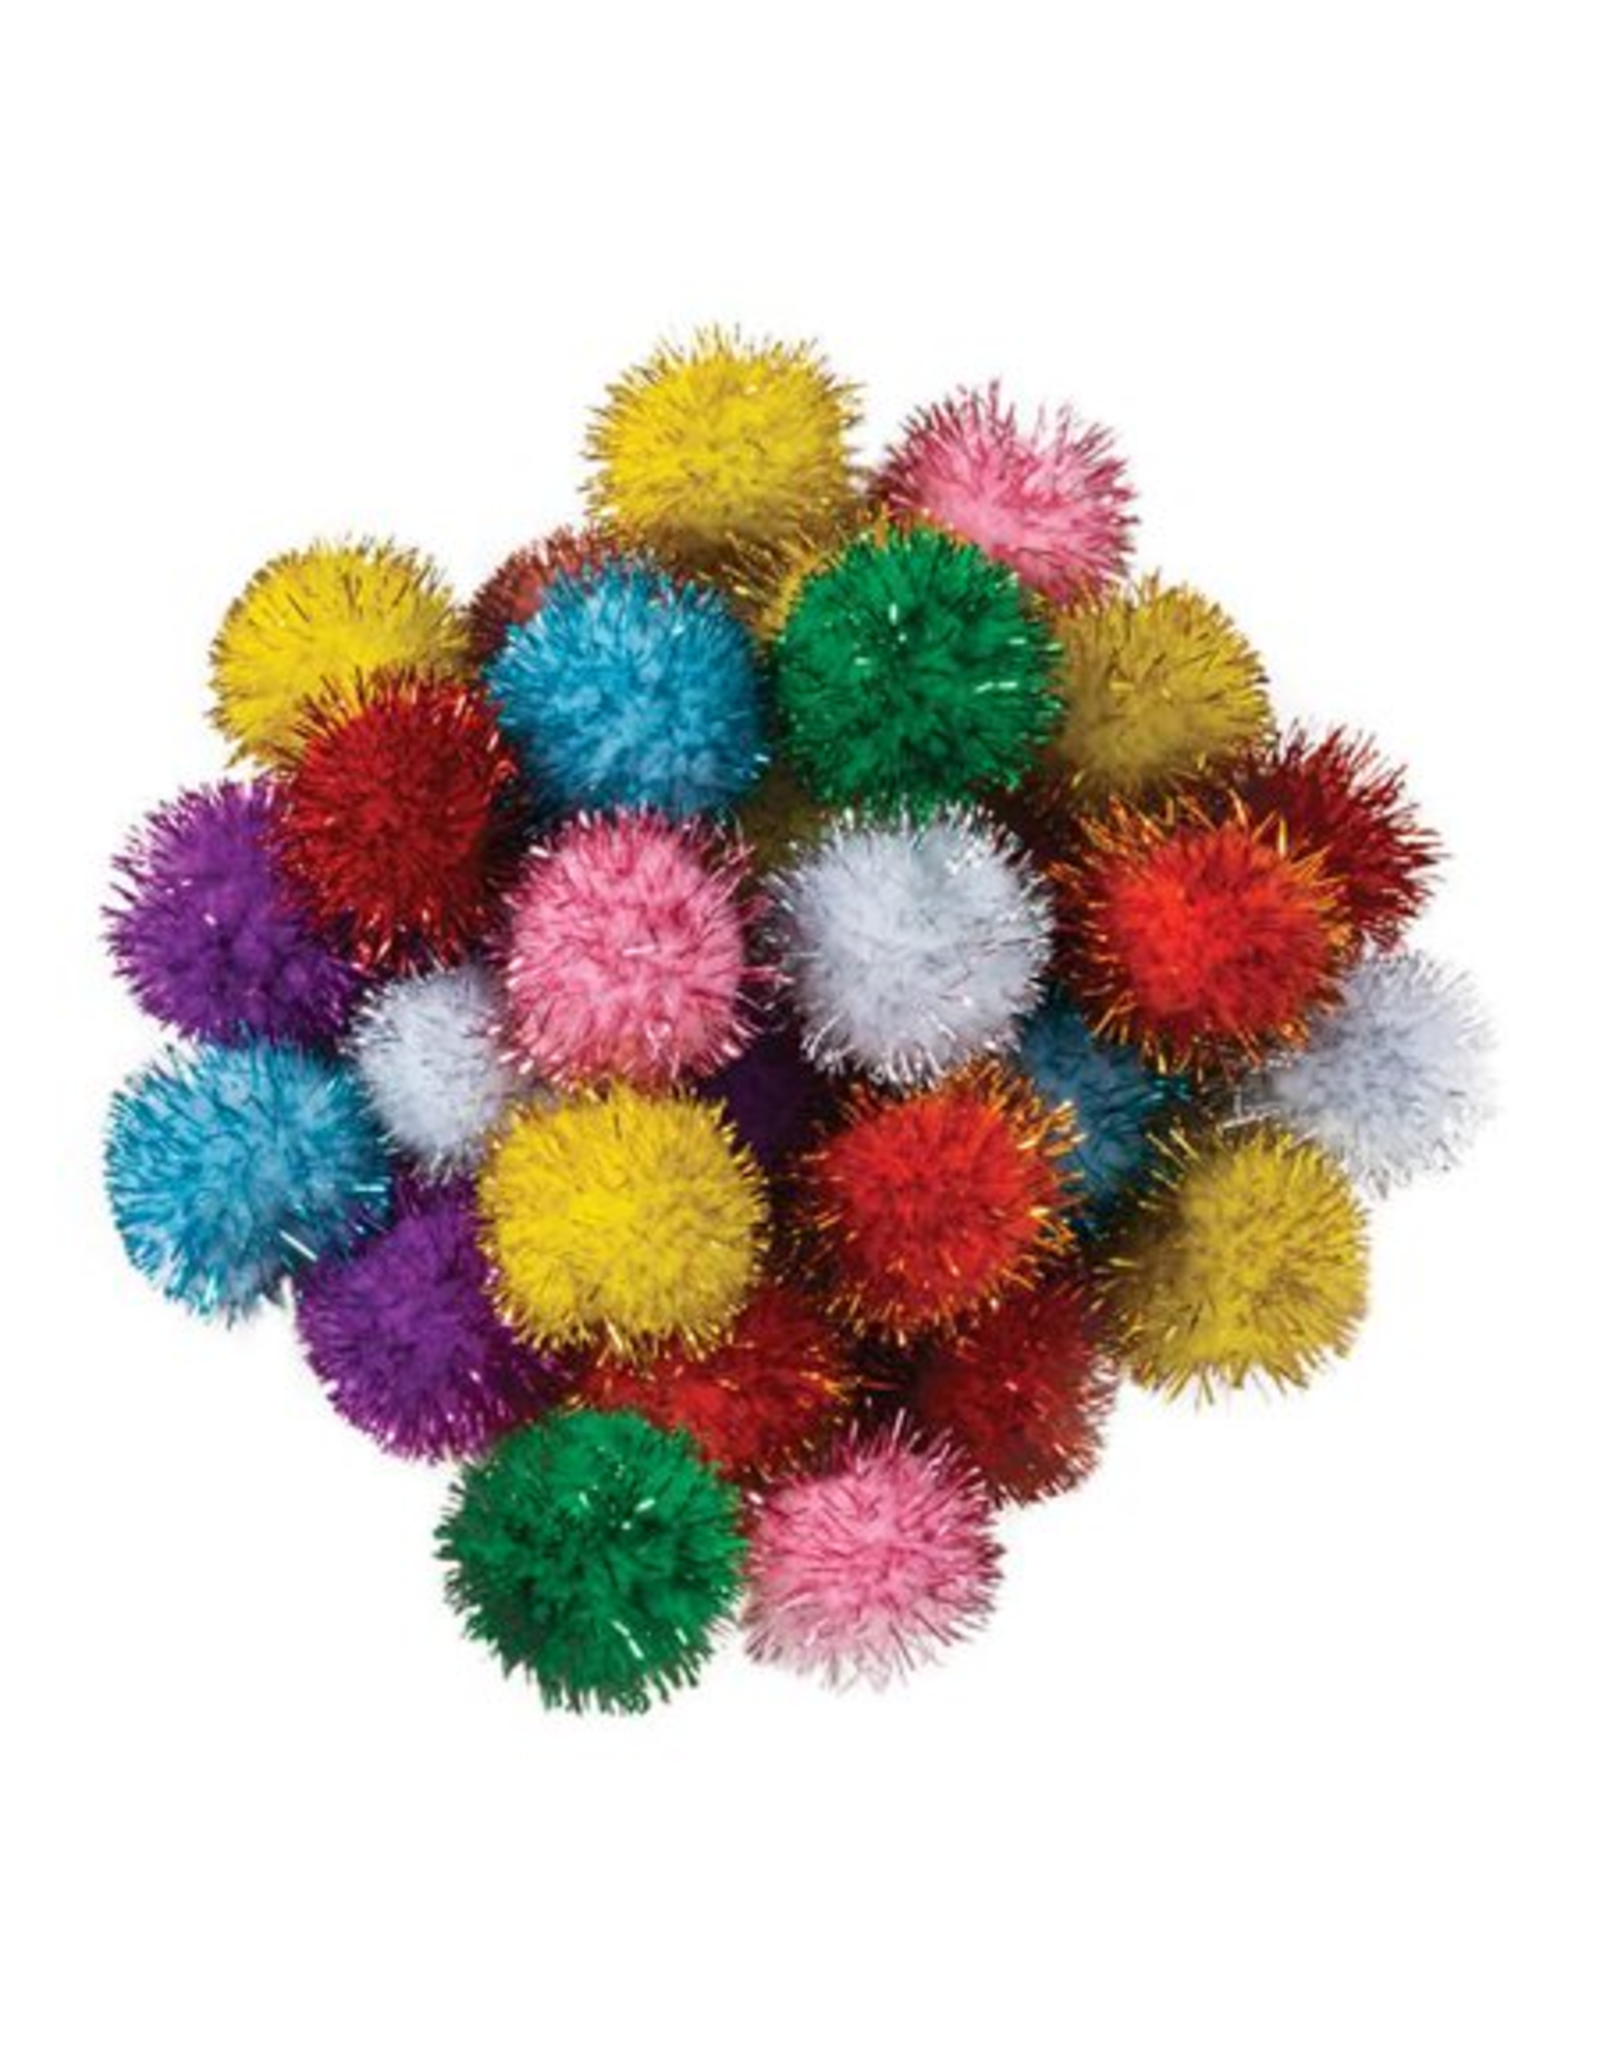 Cooraby 200 Pieces Glitter Christmas Pom Poms Assorted Colors Sparkle Pom Poms Balls for Arts Crafts Supplies (15 mm), Red